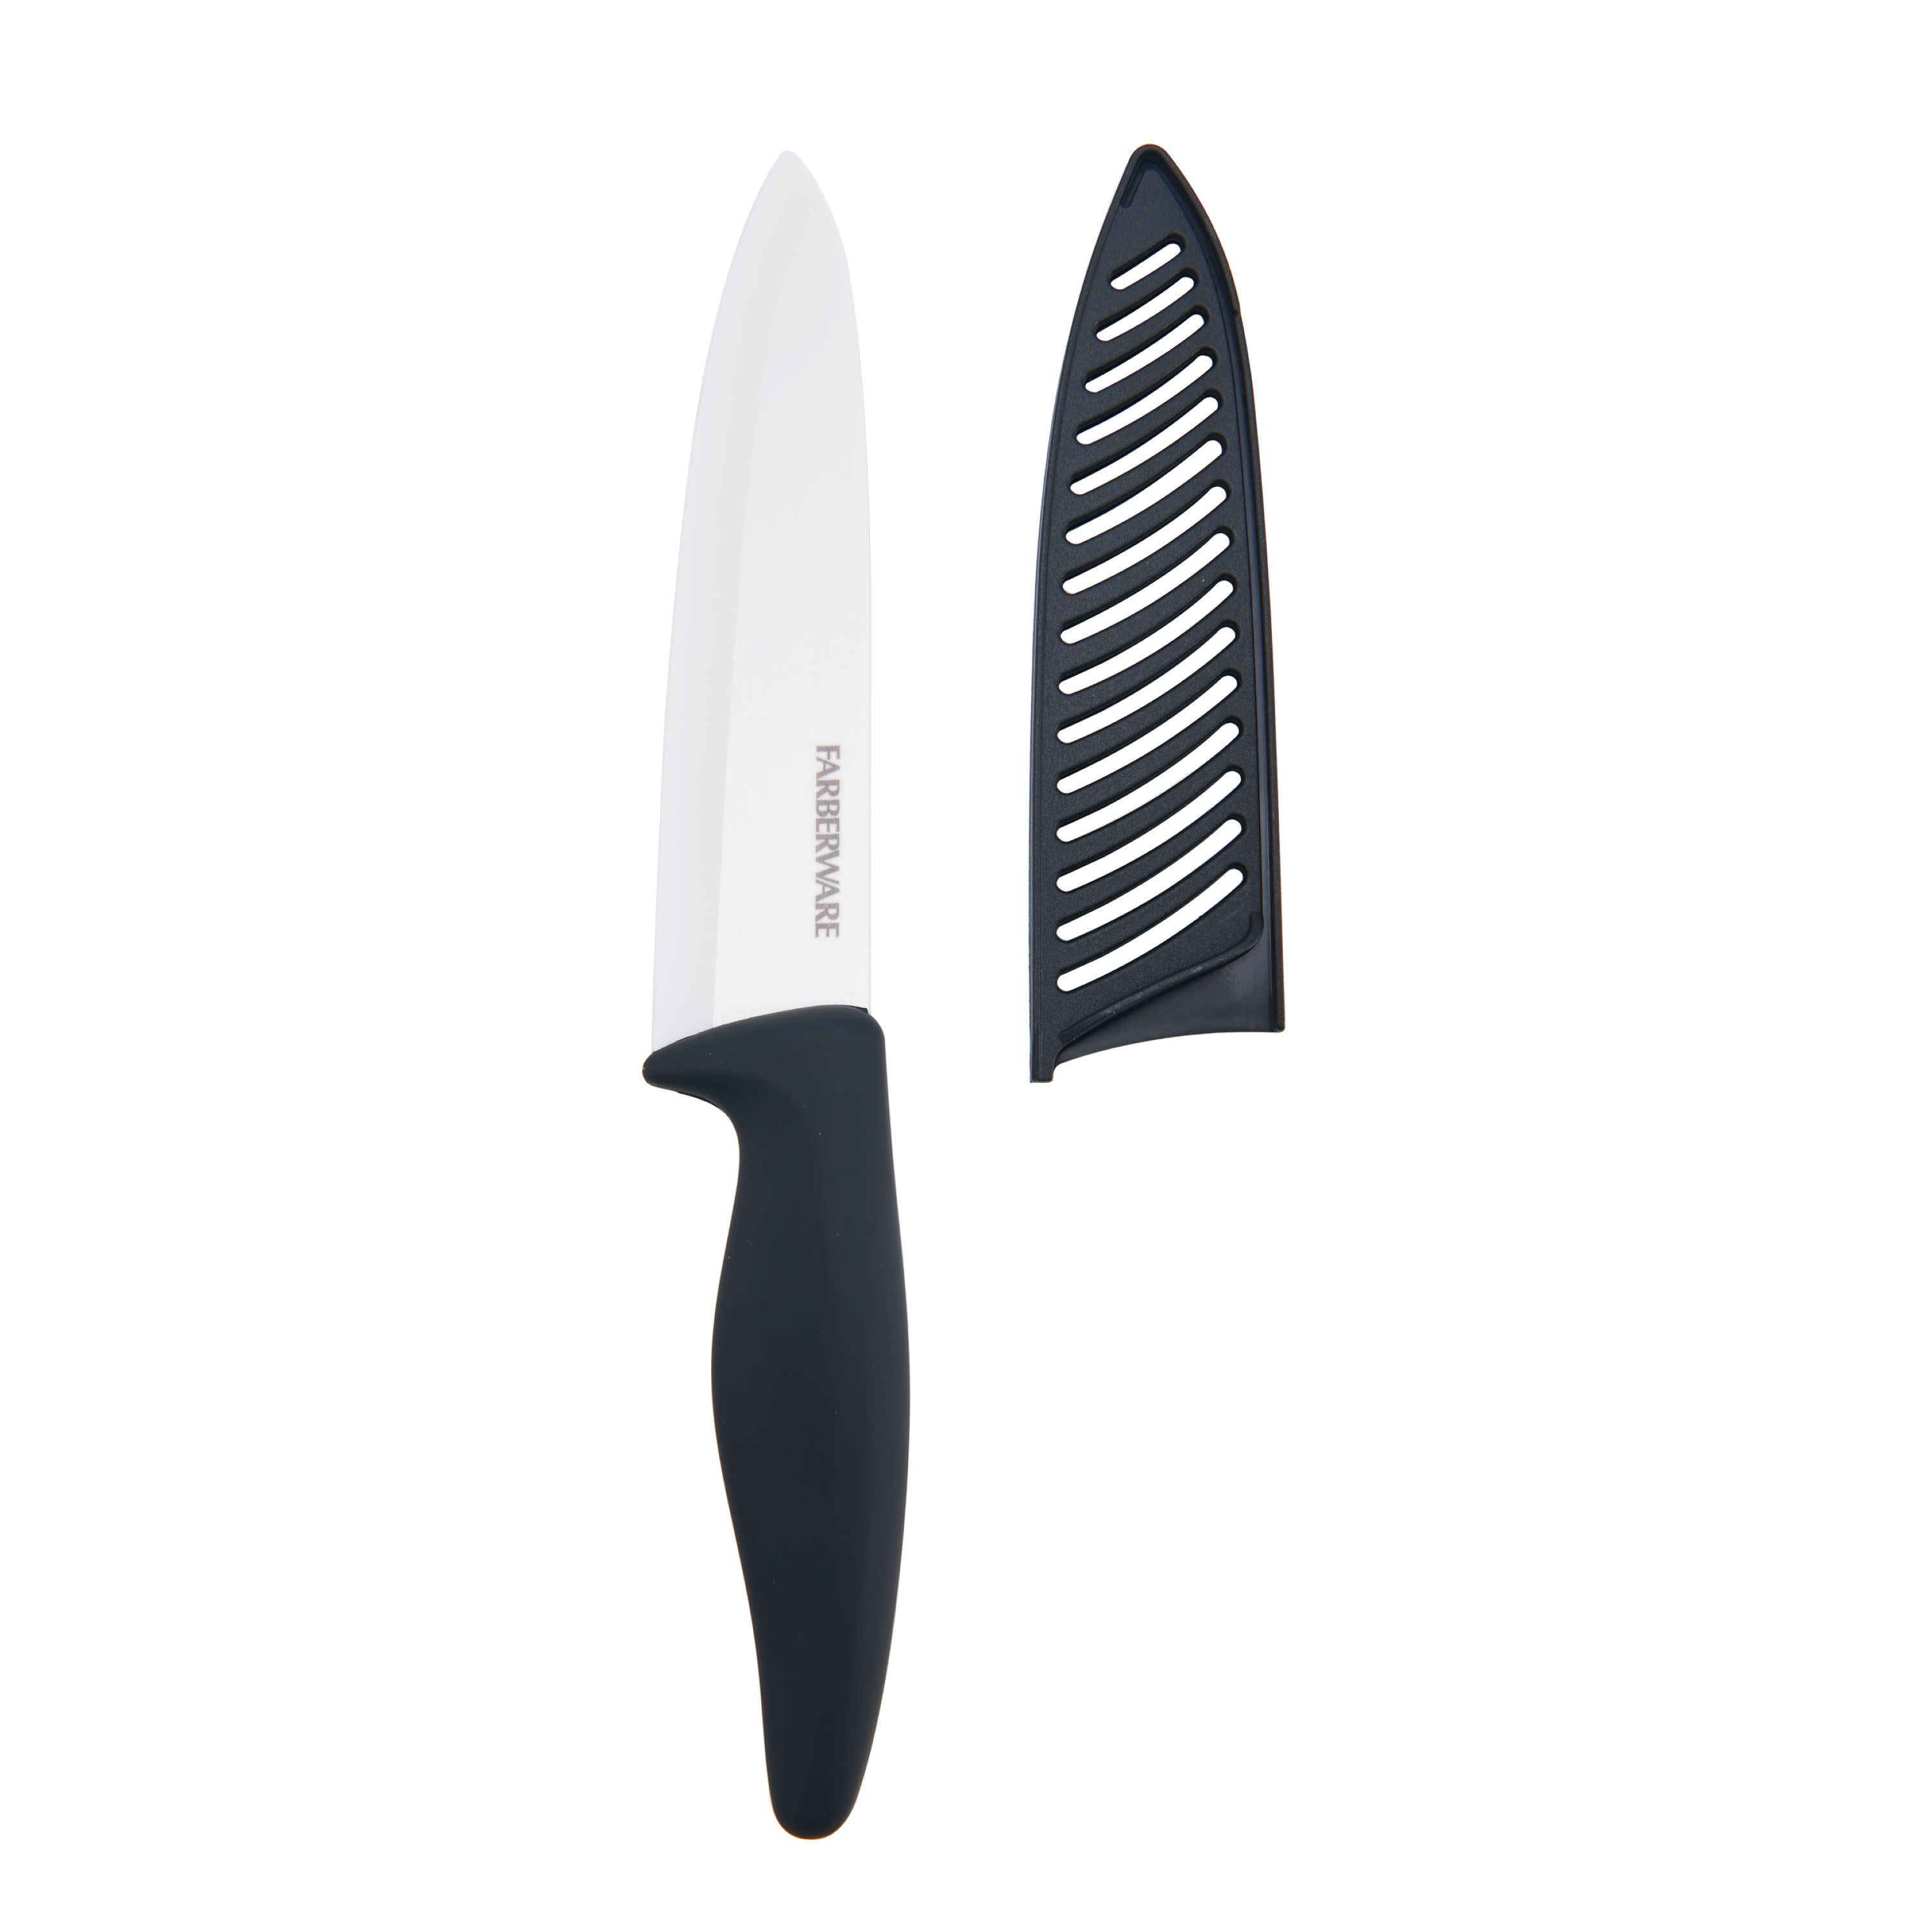 Ernesto Ceramic Chef's Knife 6.3 in Blade Length with Sheath Cover